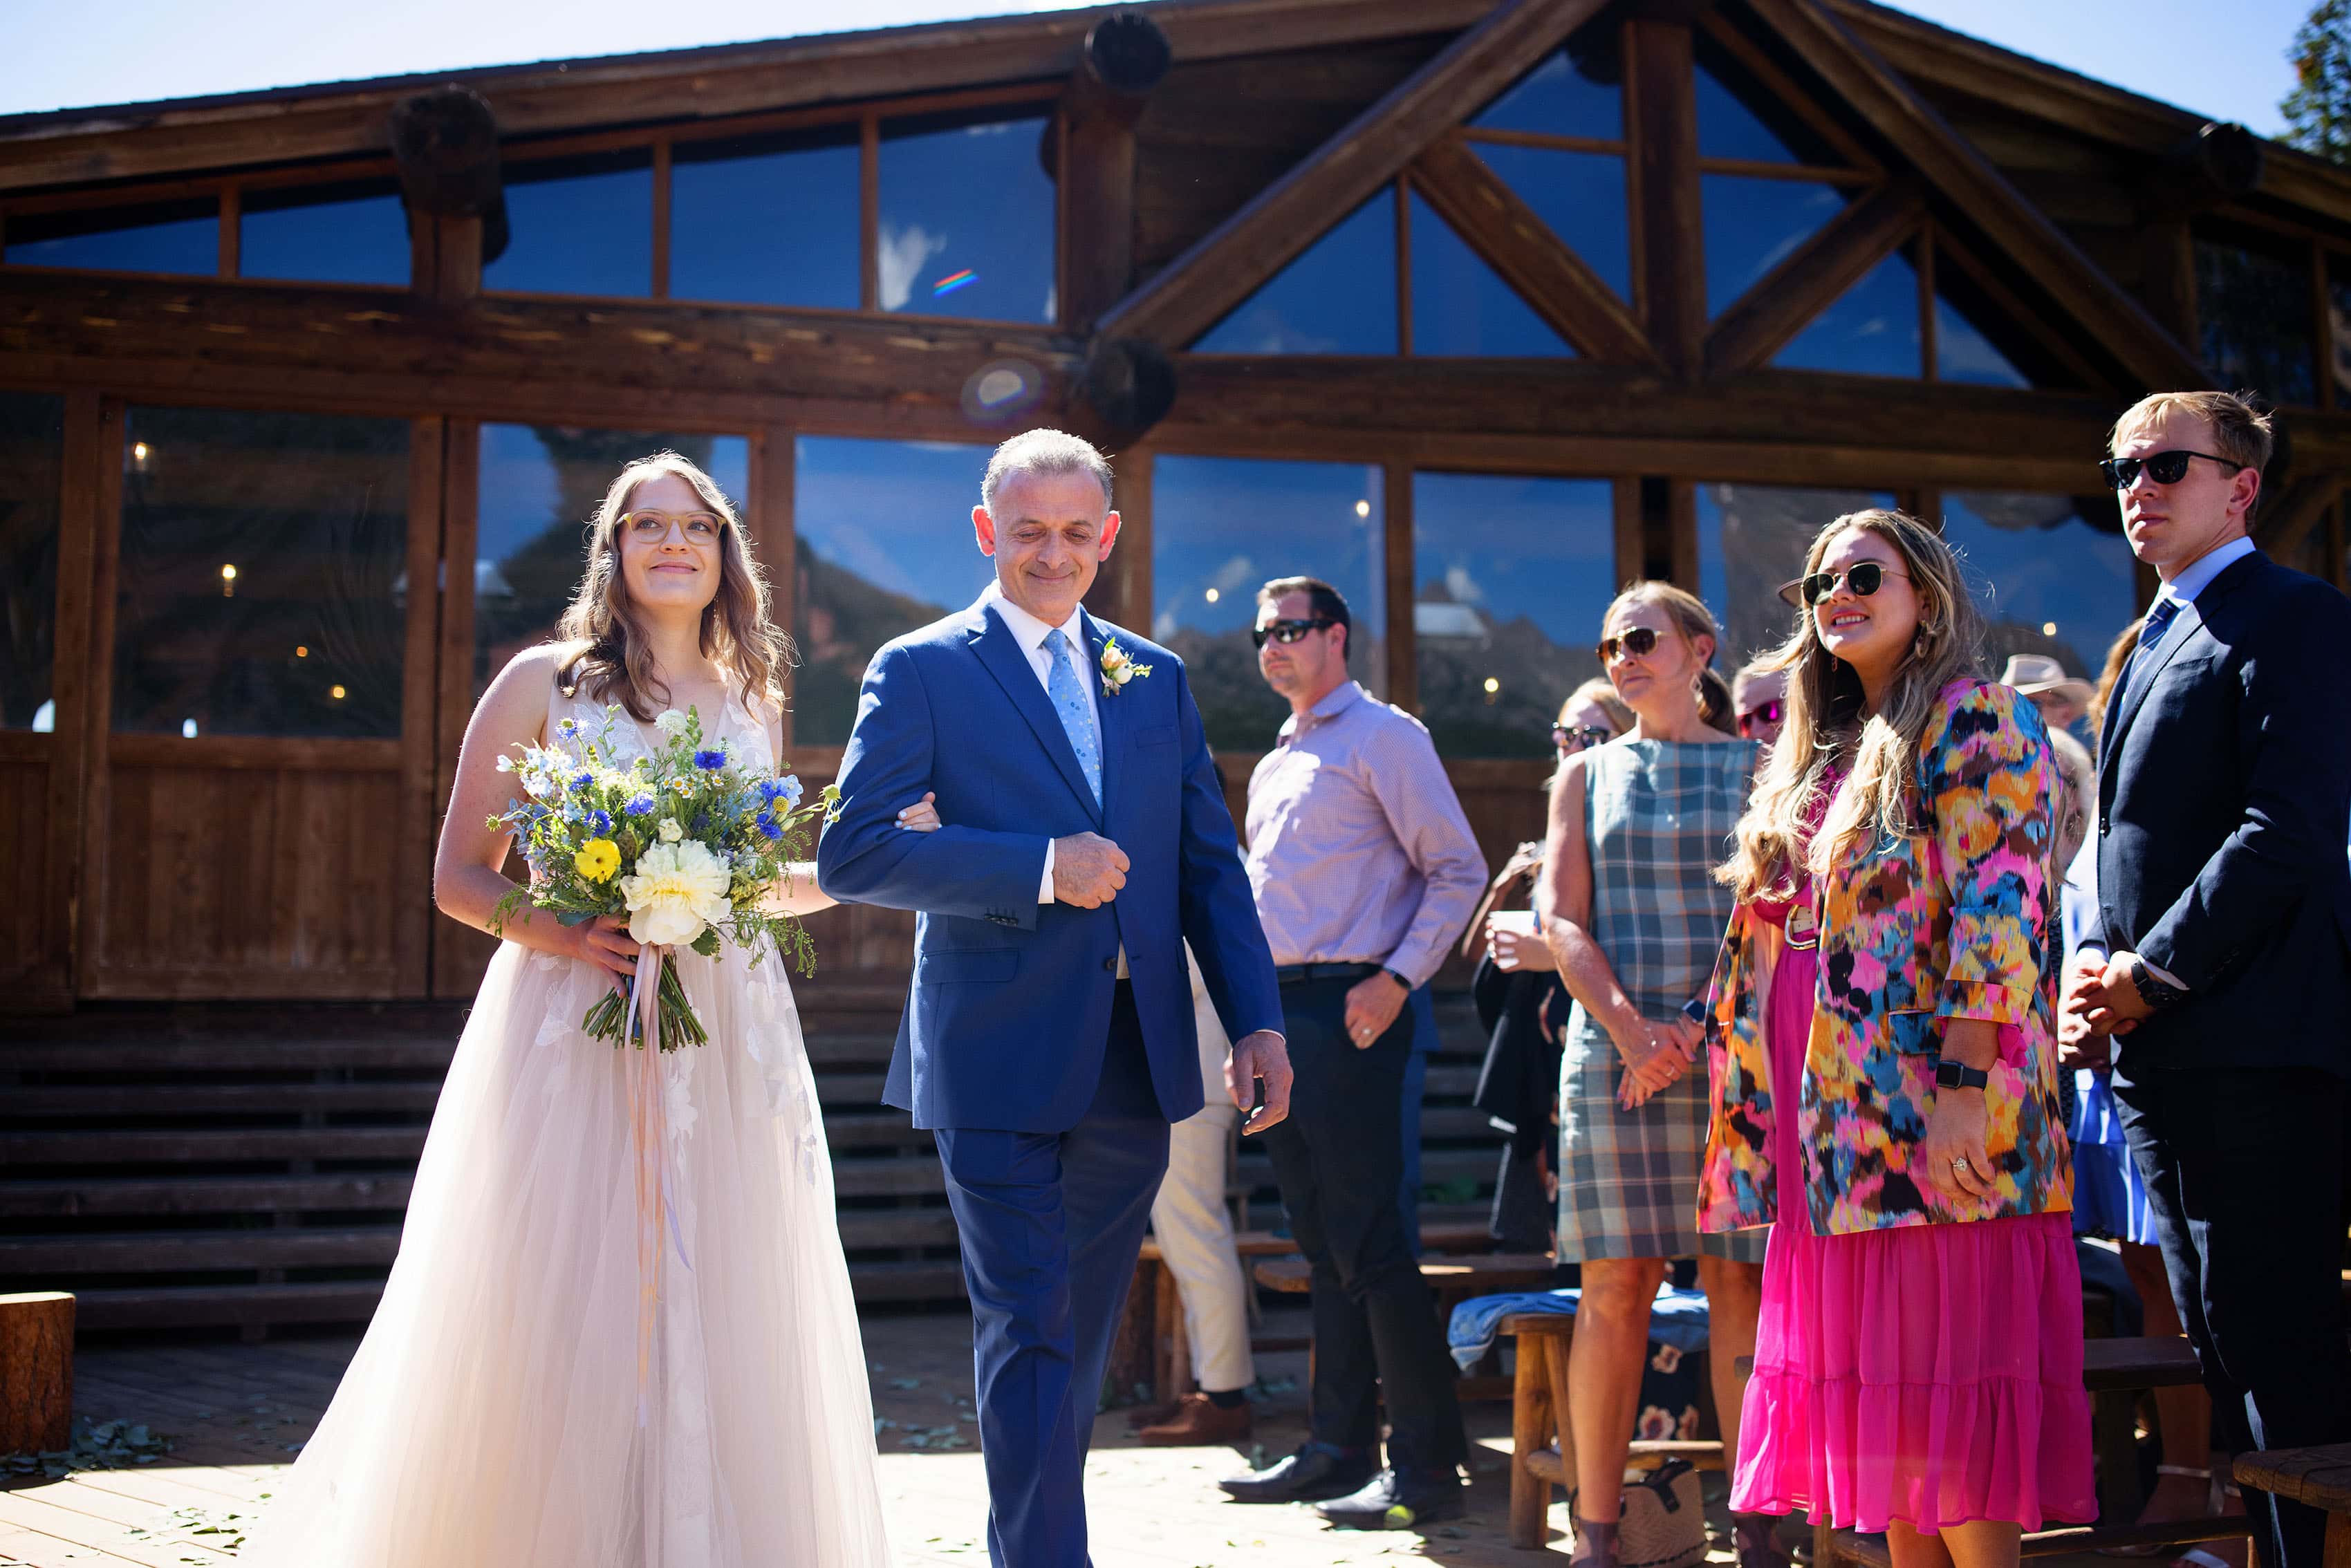 Alice and her father walk down the aisle at Piney River Ranch